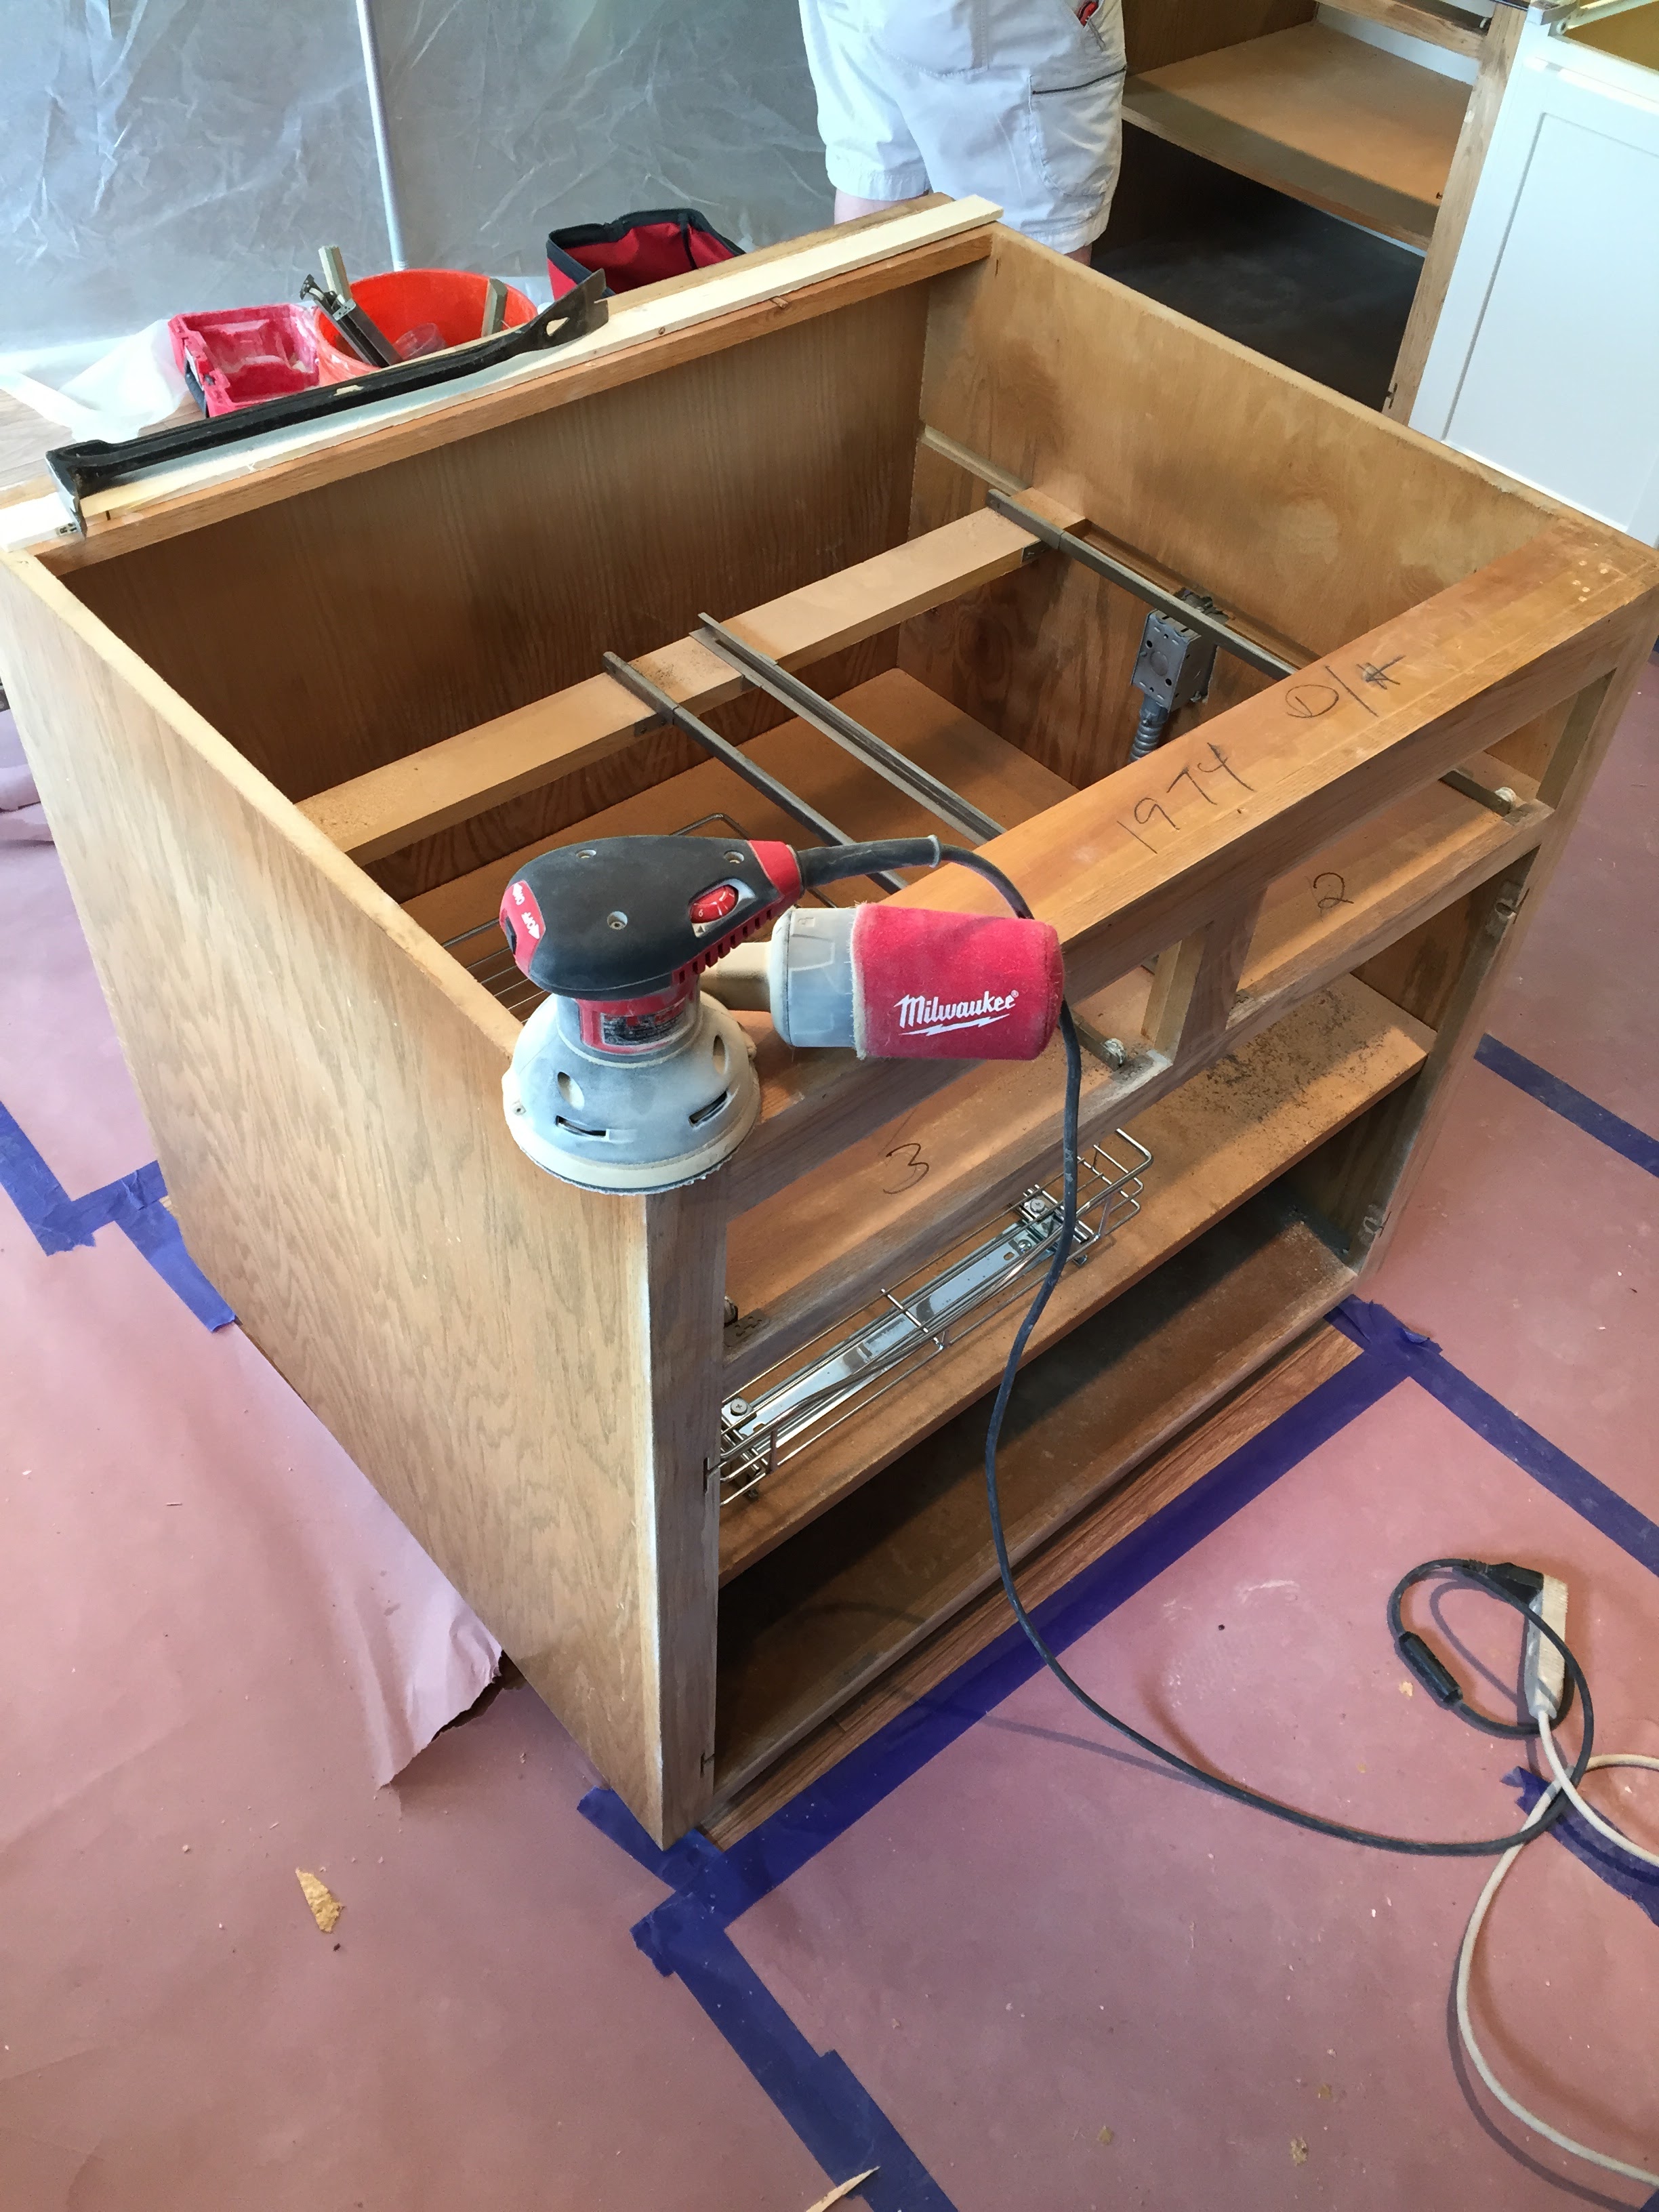 DURING - An orbital sander is used to get old paint and stain off and ready for cabinet boxes to be resurfaced